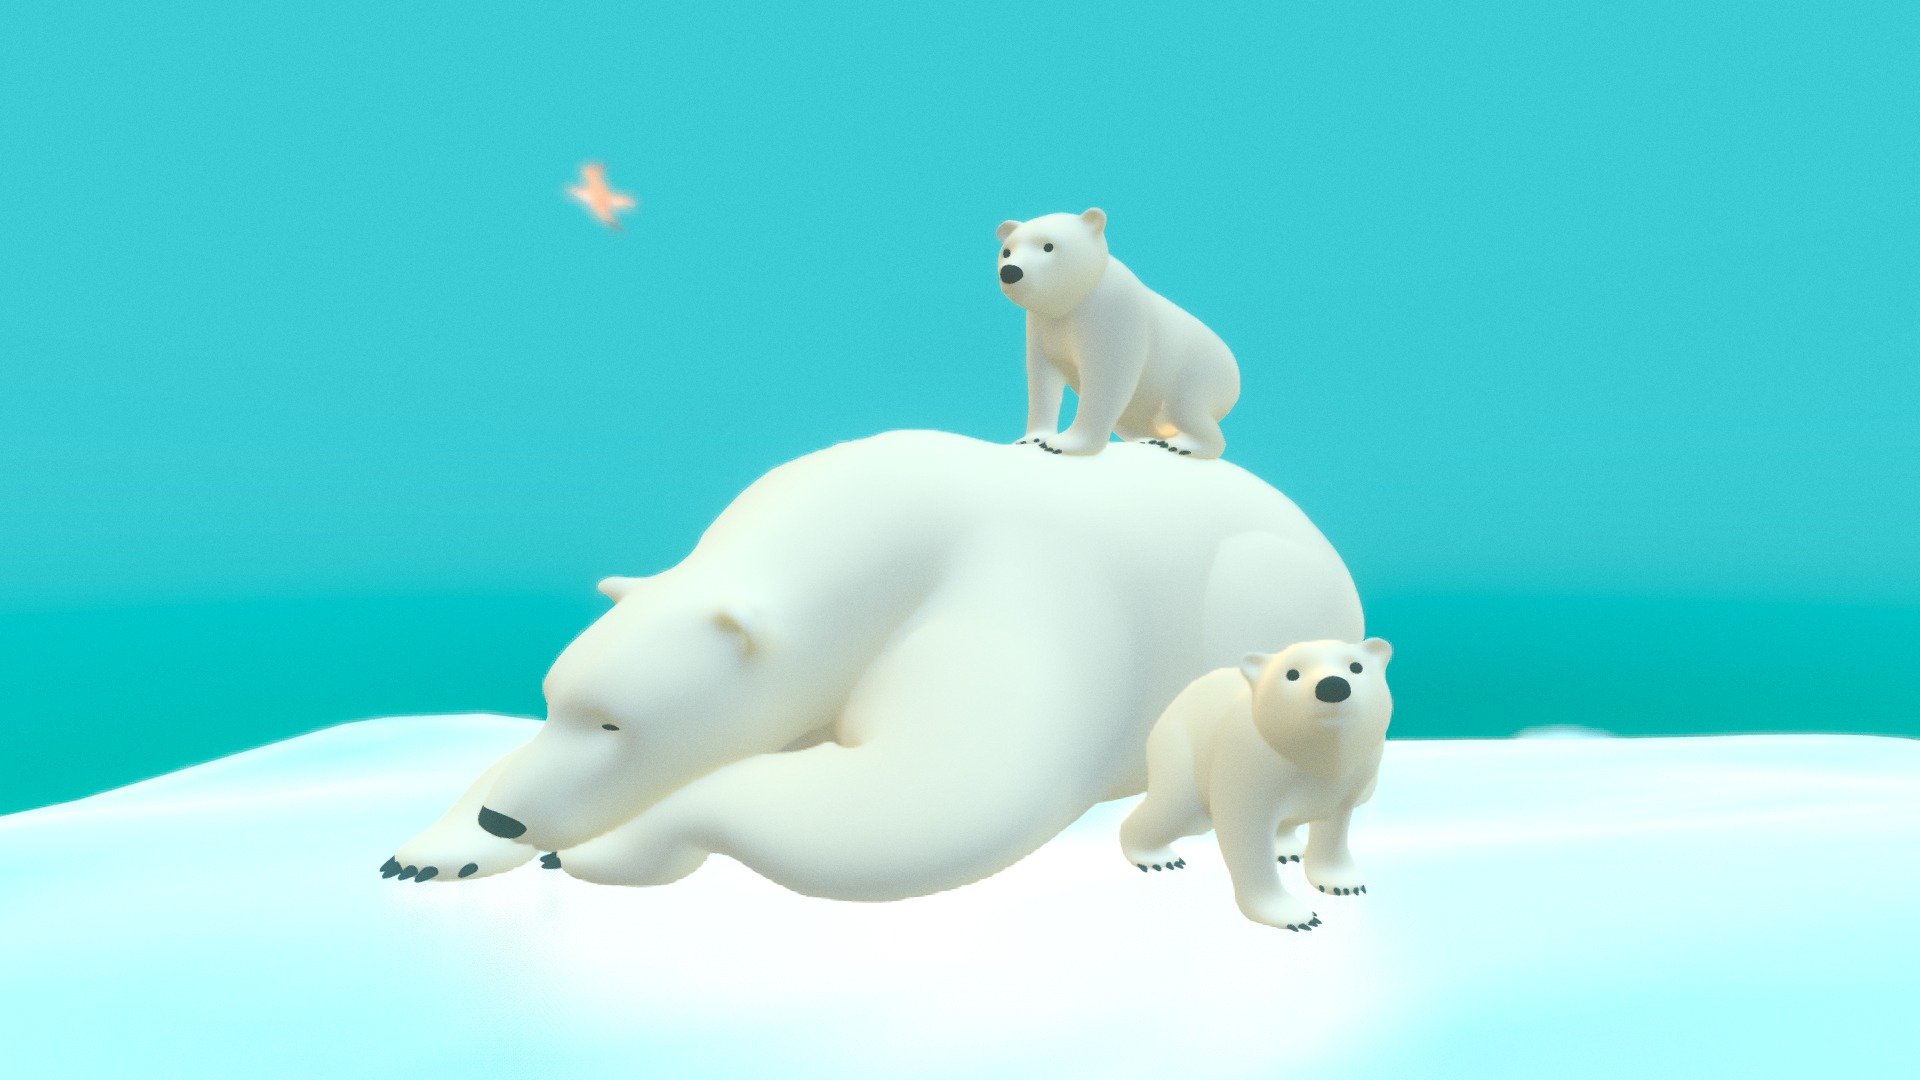 The polar bear. For this largest predator in the world, the melting sea ice is a major threat. The total number is expected to have dropped by 30% in 2050.

Enter the diorama to look at this little family up close! - Polar Bears - 3D model by eVRgreen Studio (@evrgreenstudio) 3d model